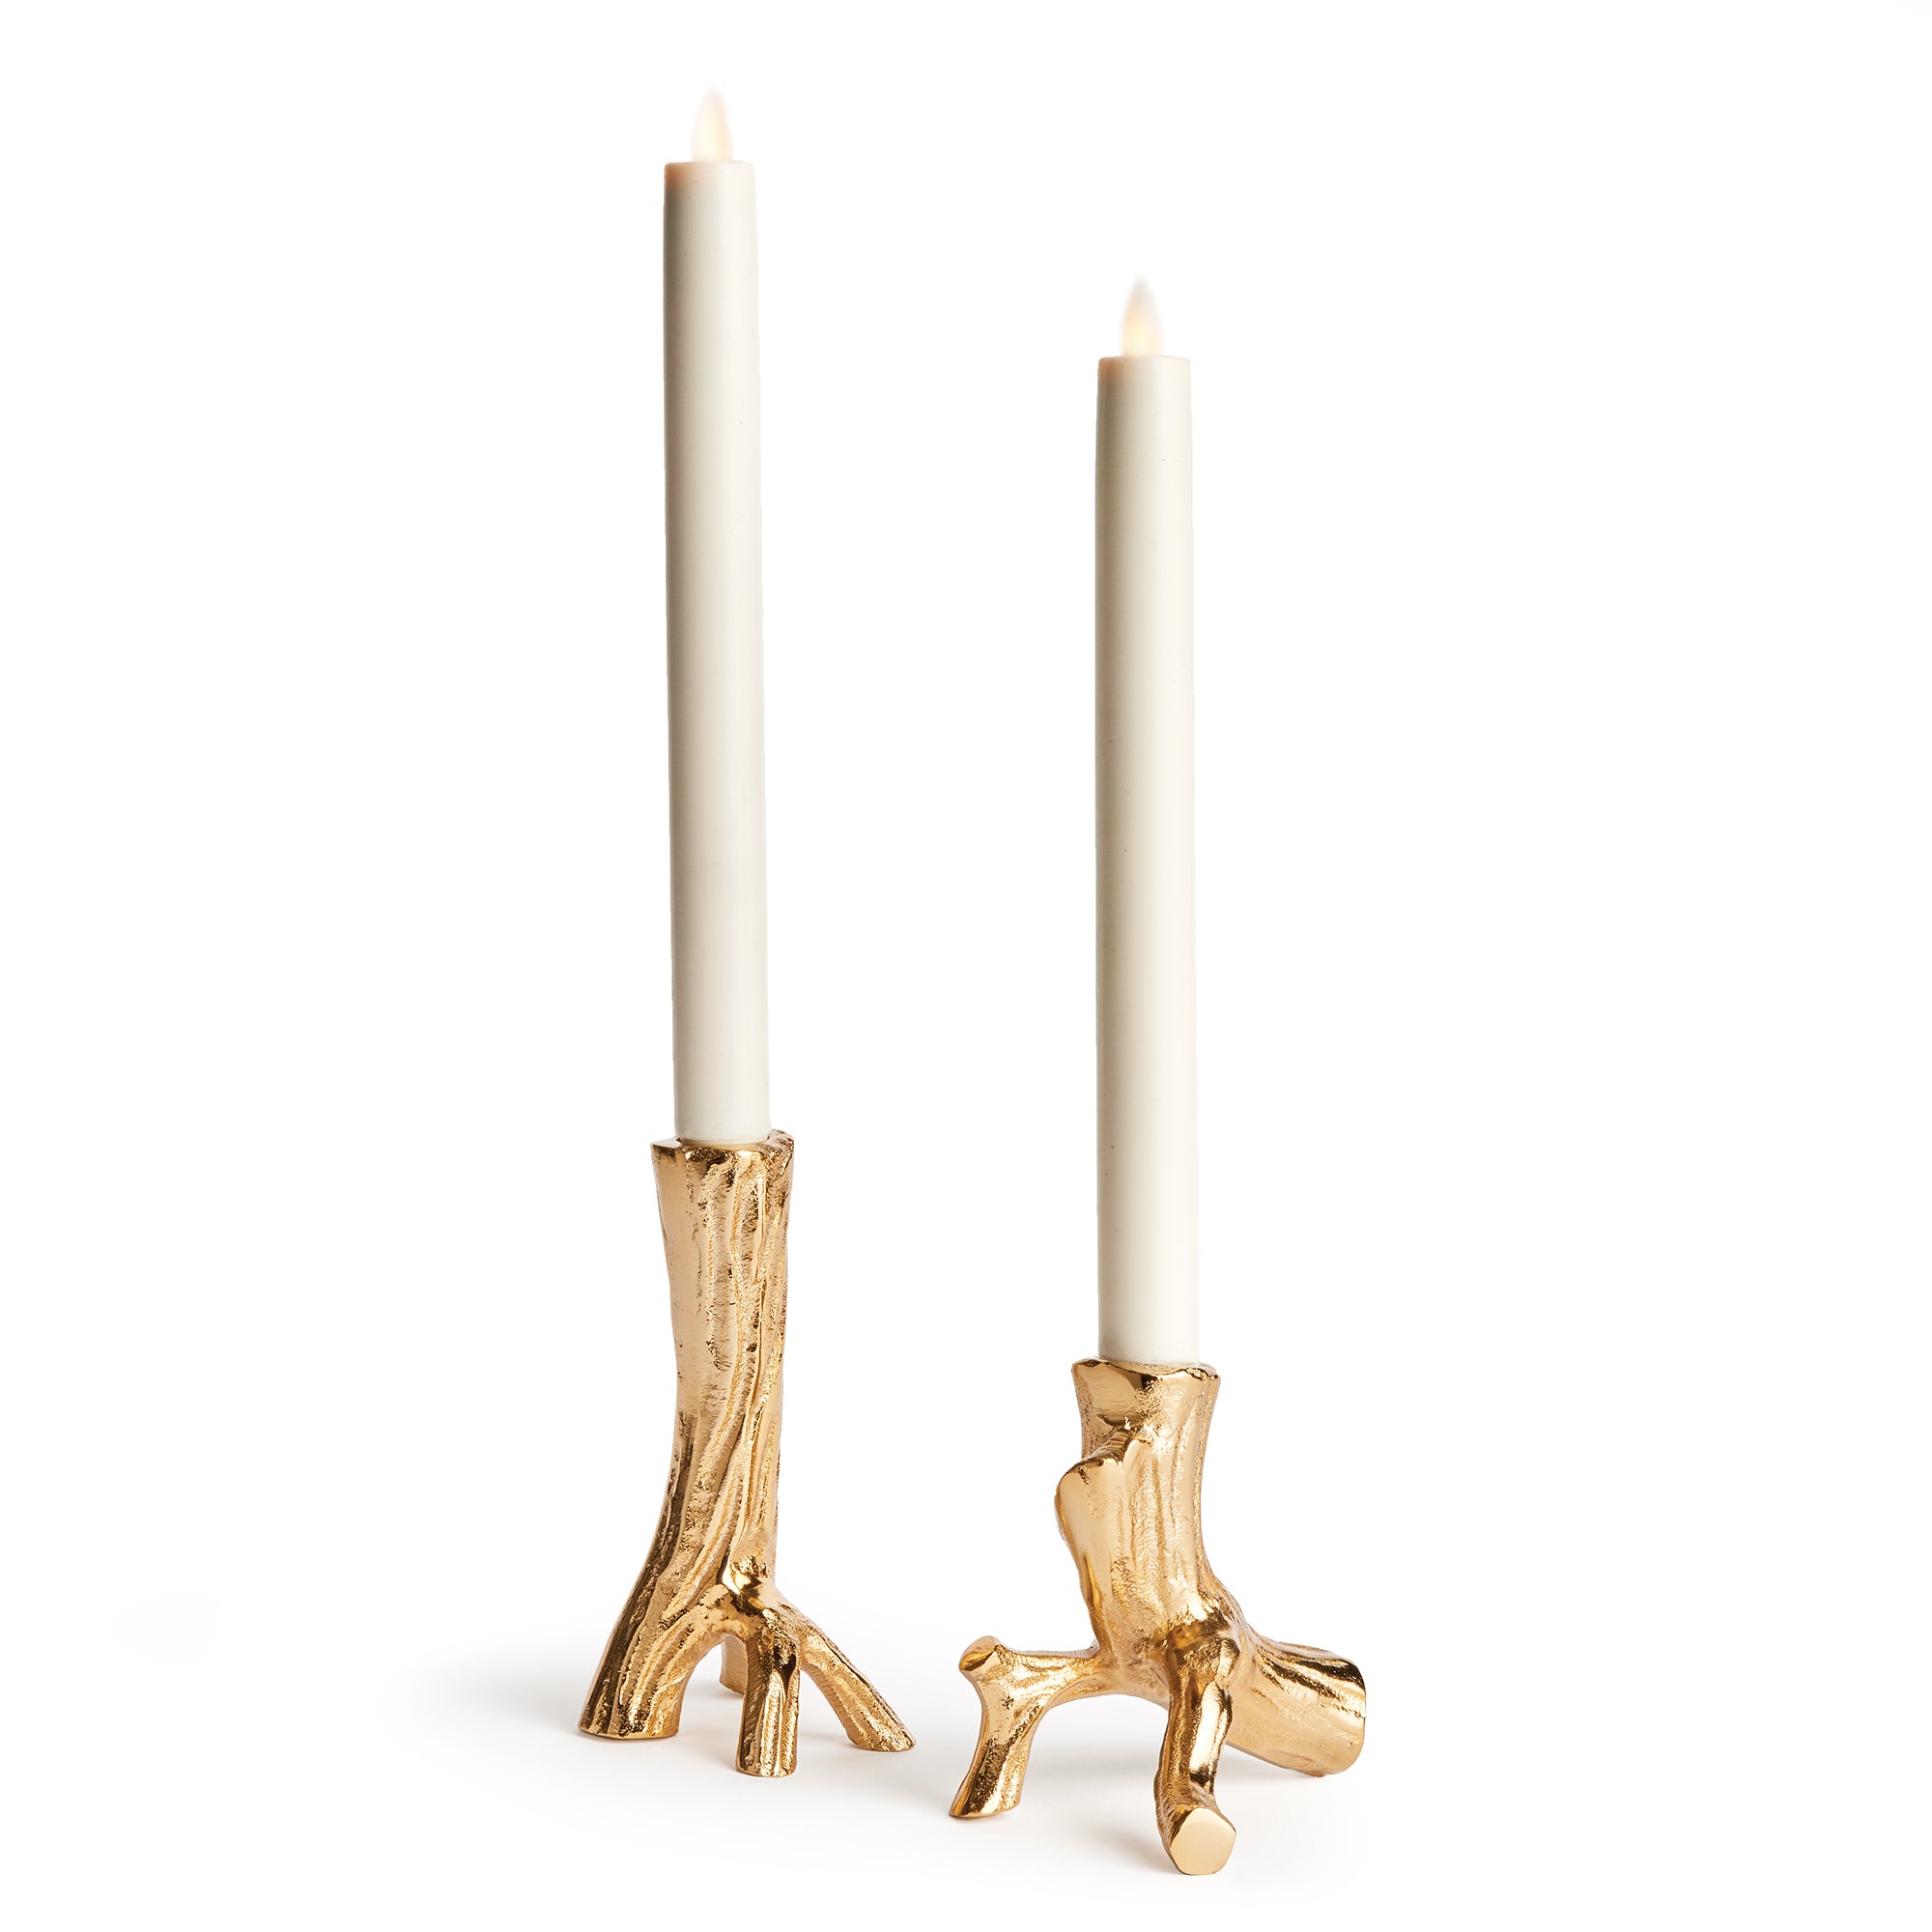 Made from hand-sculpted molds and in solid cast aluminum, these taper holders in warm gold are a substantial accent. Pair with any style taper candle and watch them glow. Amethyst Home provides interior design, new construction, custom furniture, and area rugs in the Scottsdale metro area.